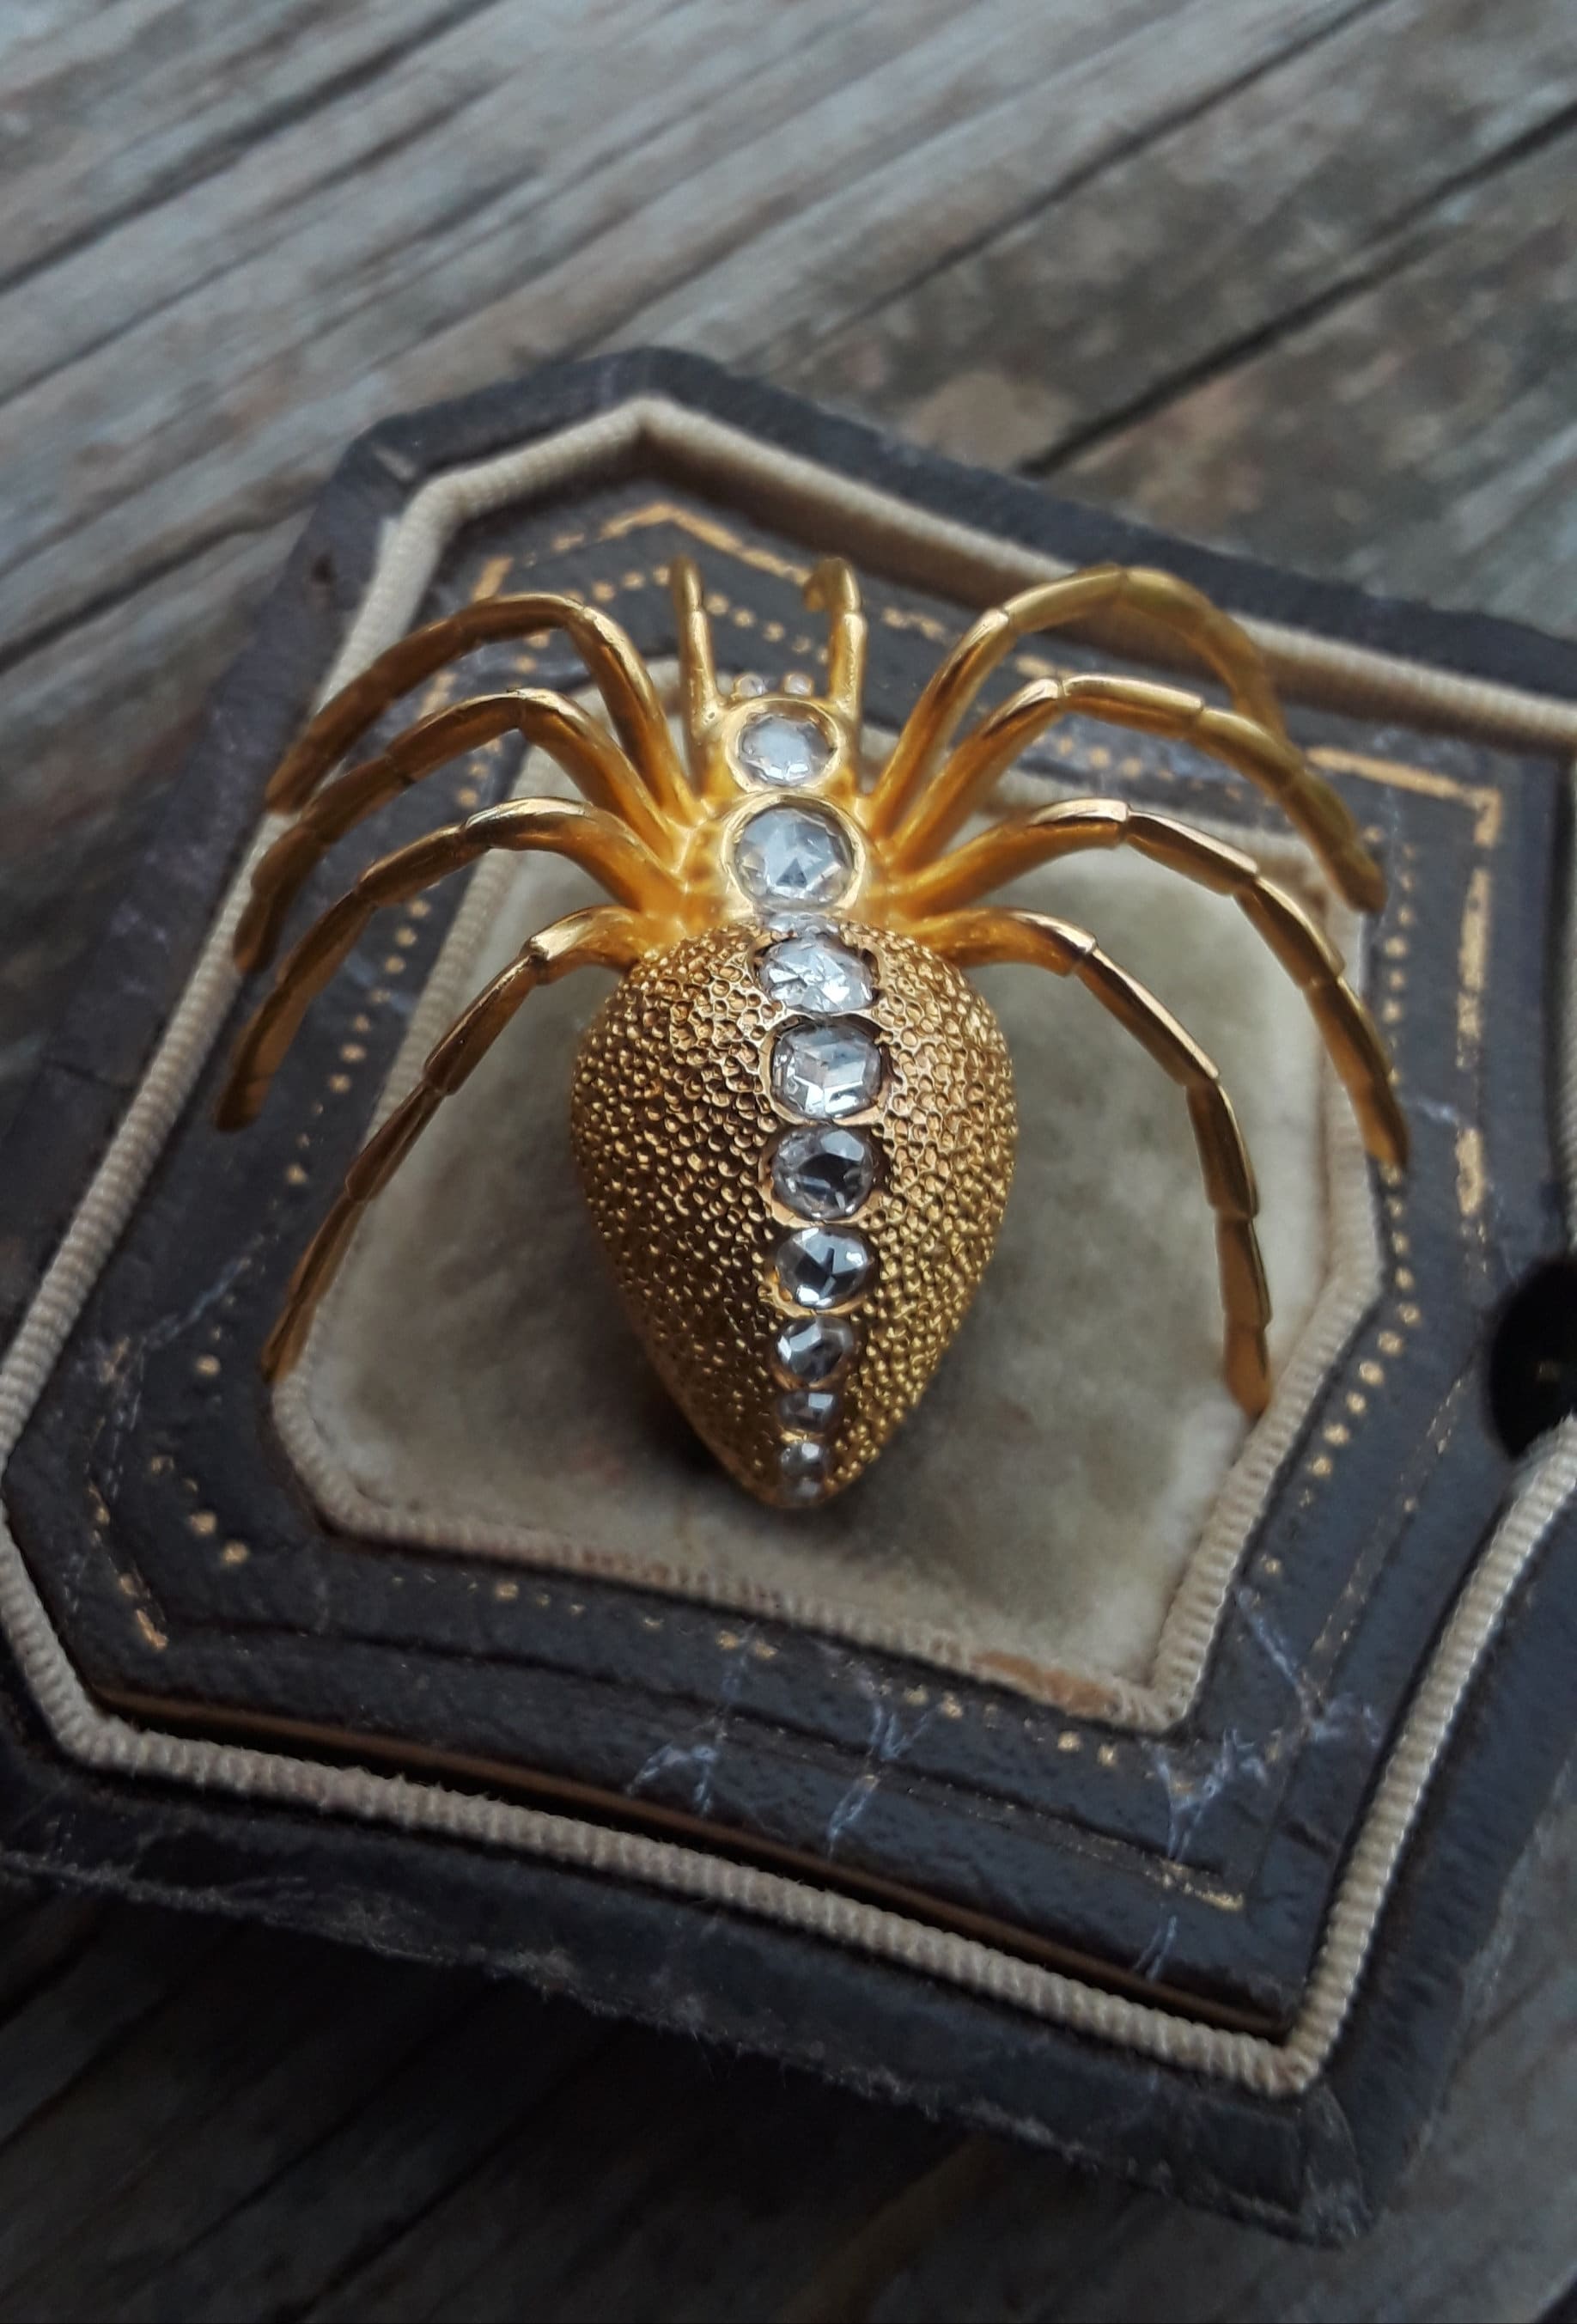 How is a Faberge Black Widow brooch worth?